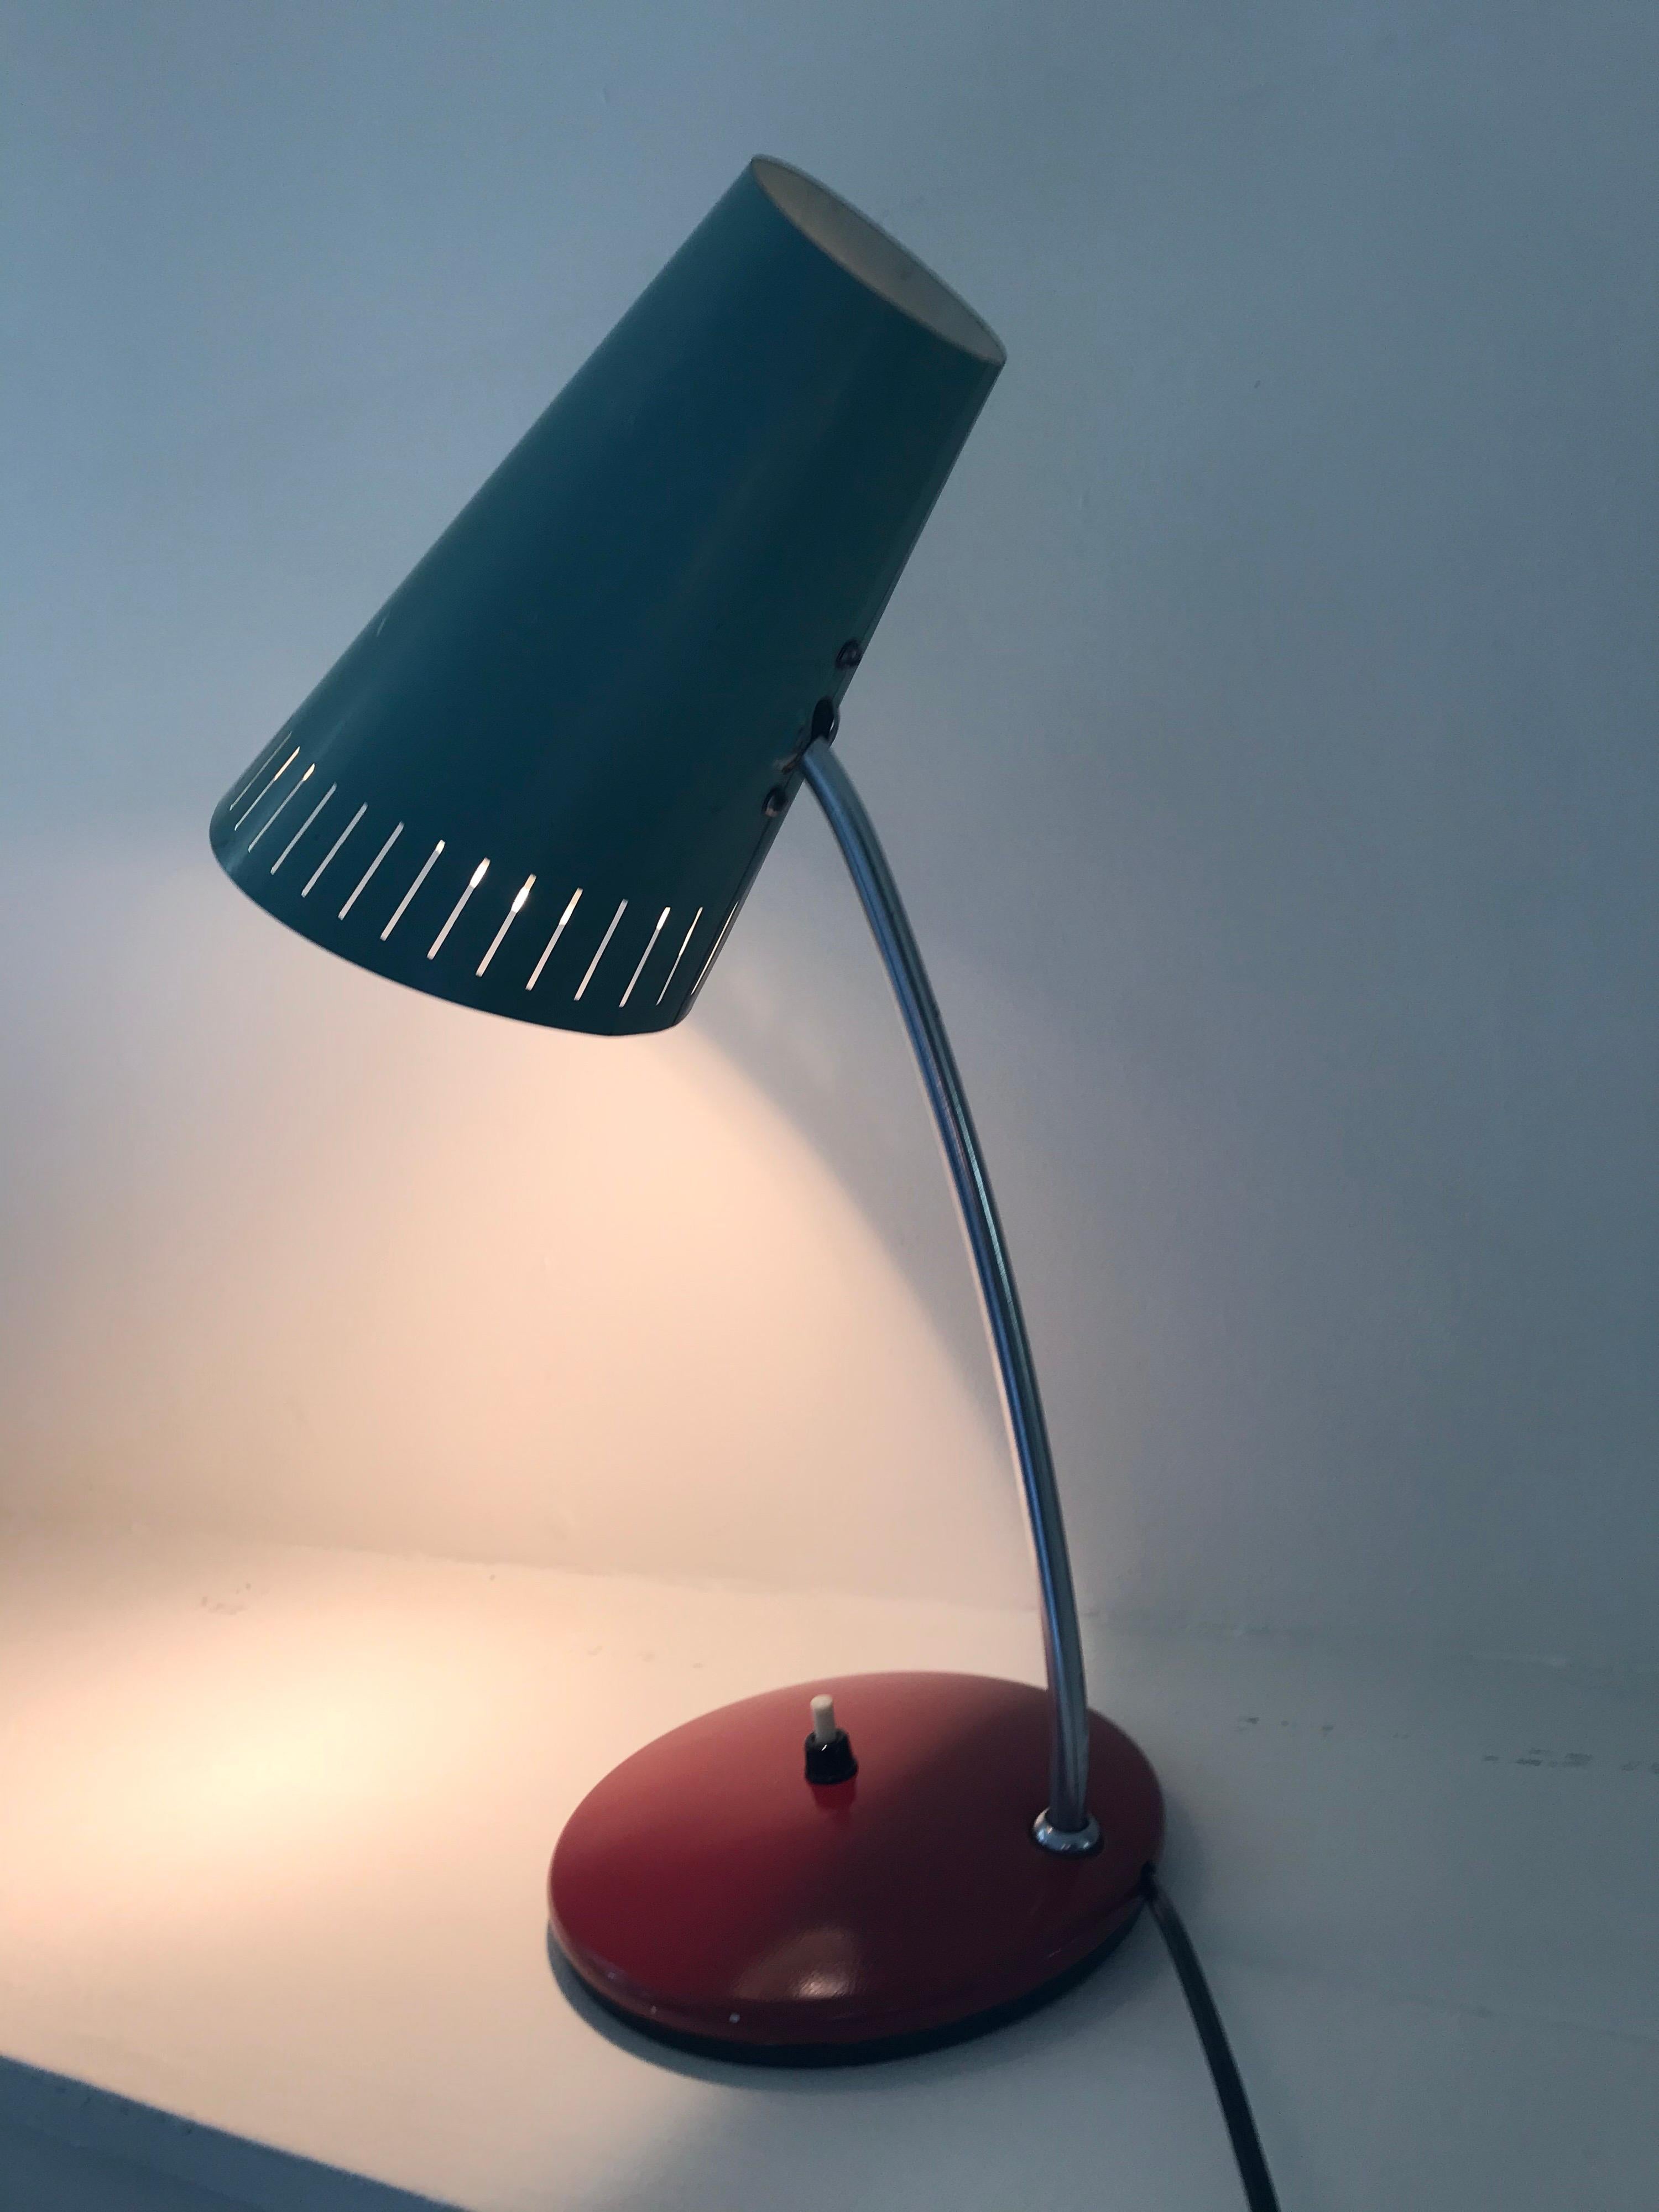 Mid-Century Modern Cone Shaped Desk Lamp, Turquoise and Red, Russia, 1966 For Sale 3